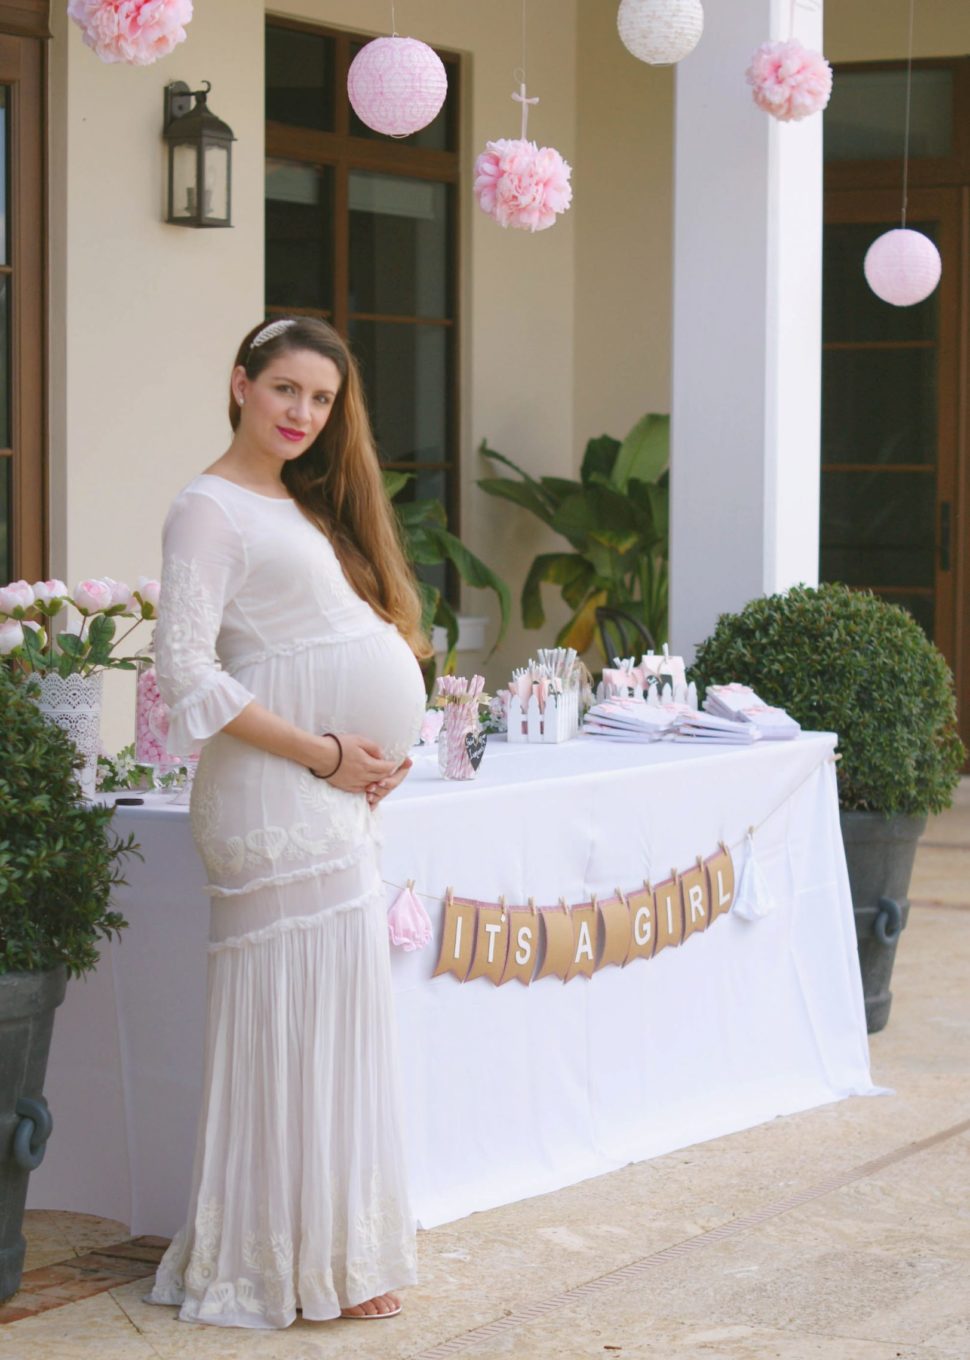 Medium Size of Baby Shower:pink Maternity Dress Maternity Gowns For Photography Maternity Dresses For Baby Shower Mom And Dad Baby Shower Outfits Maternity Blouses For Baby Shower Plus Size Maternity Dresses For Baby Shower What Should I Wear To My Baby Shower Plus Size Maternity Clothes